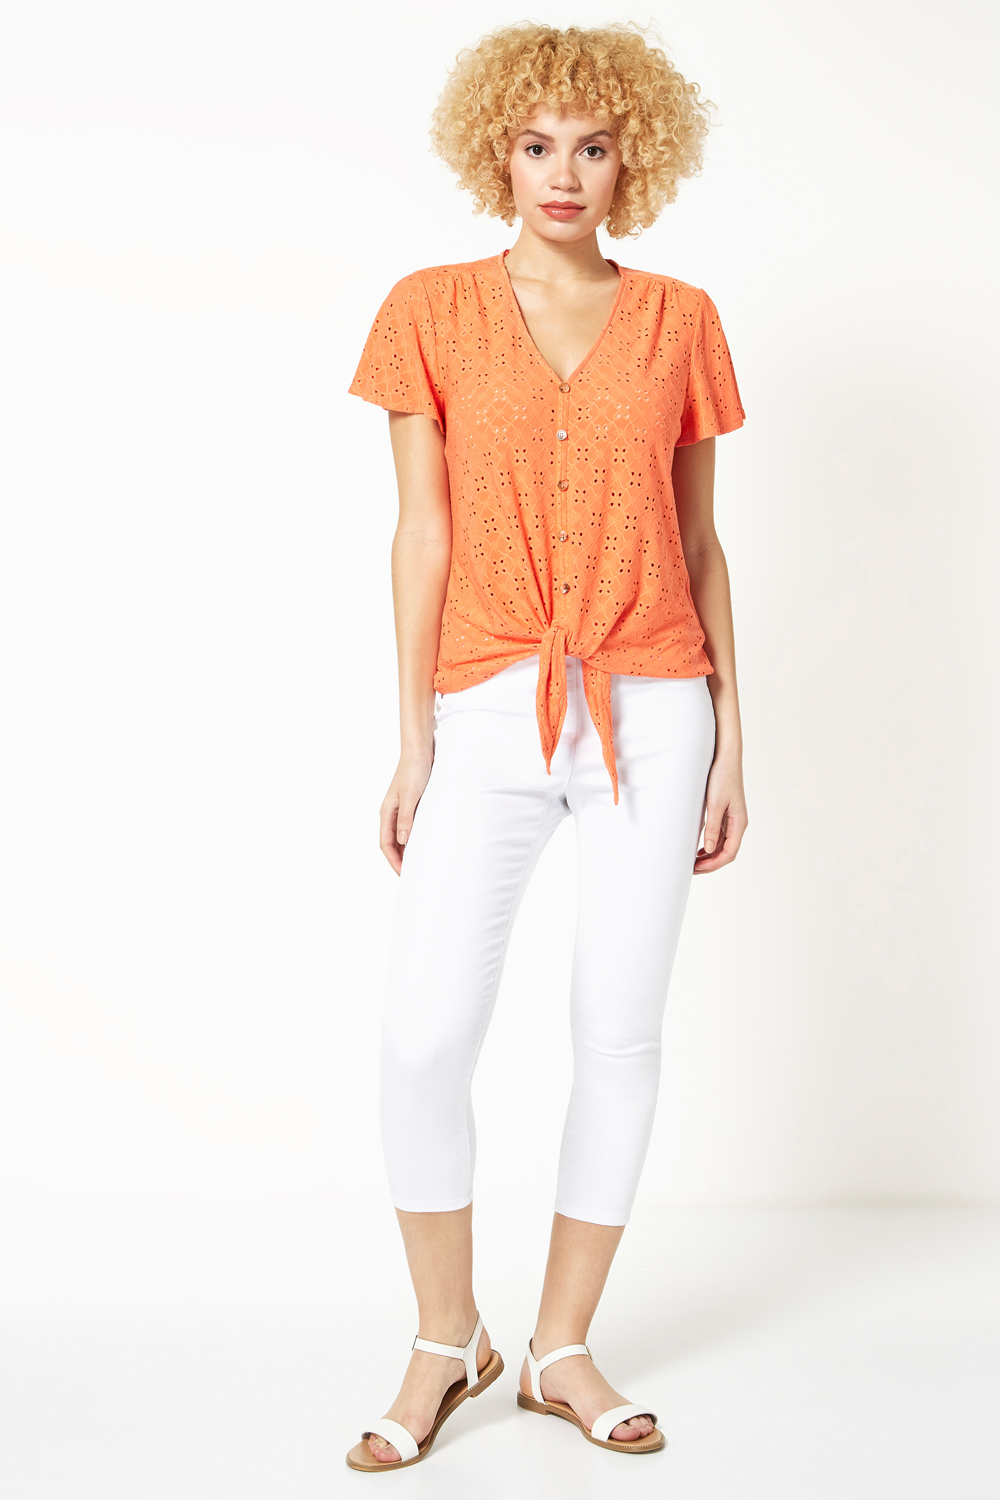 CORAL Broderie Stretch Jersey Tie Front Top, Image 2 of 4